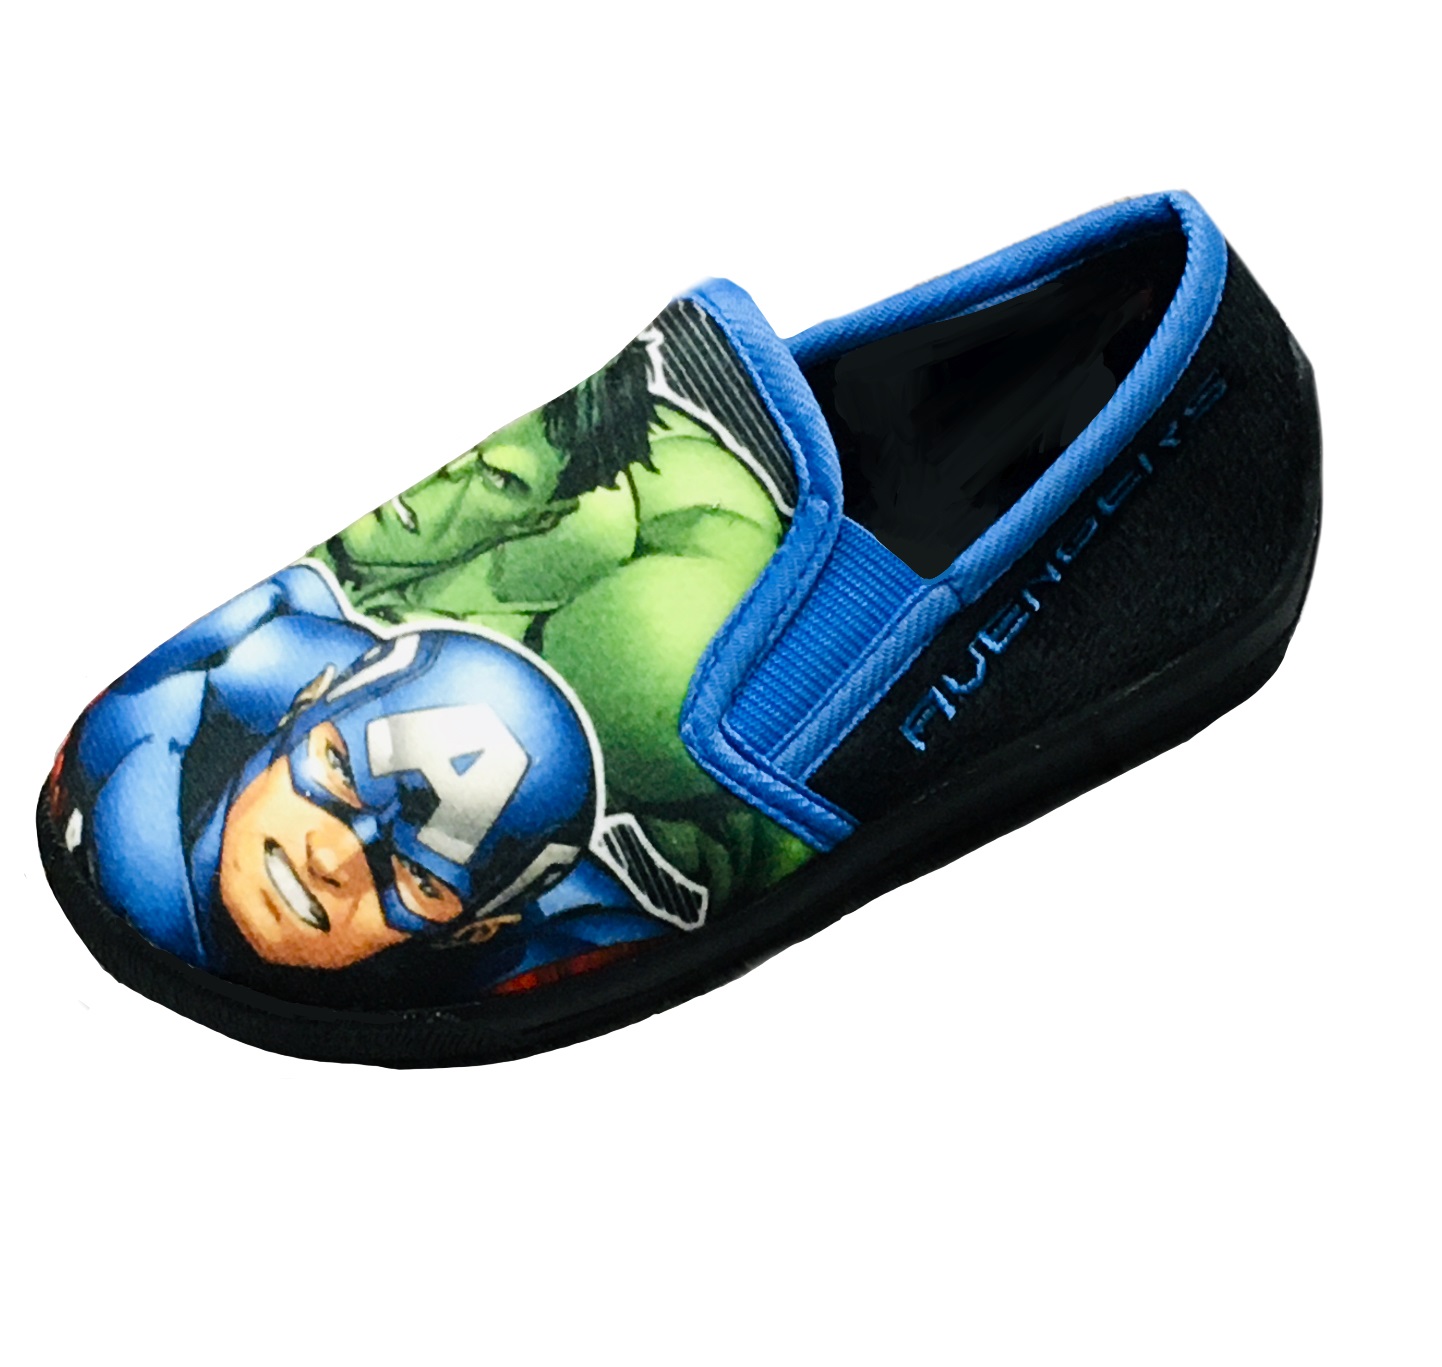 Boys Marvel Avengers Slippers Size 9 - 3 - Kids With Character